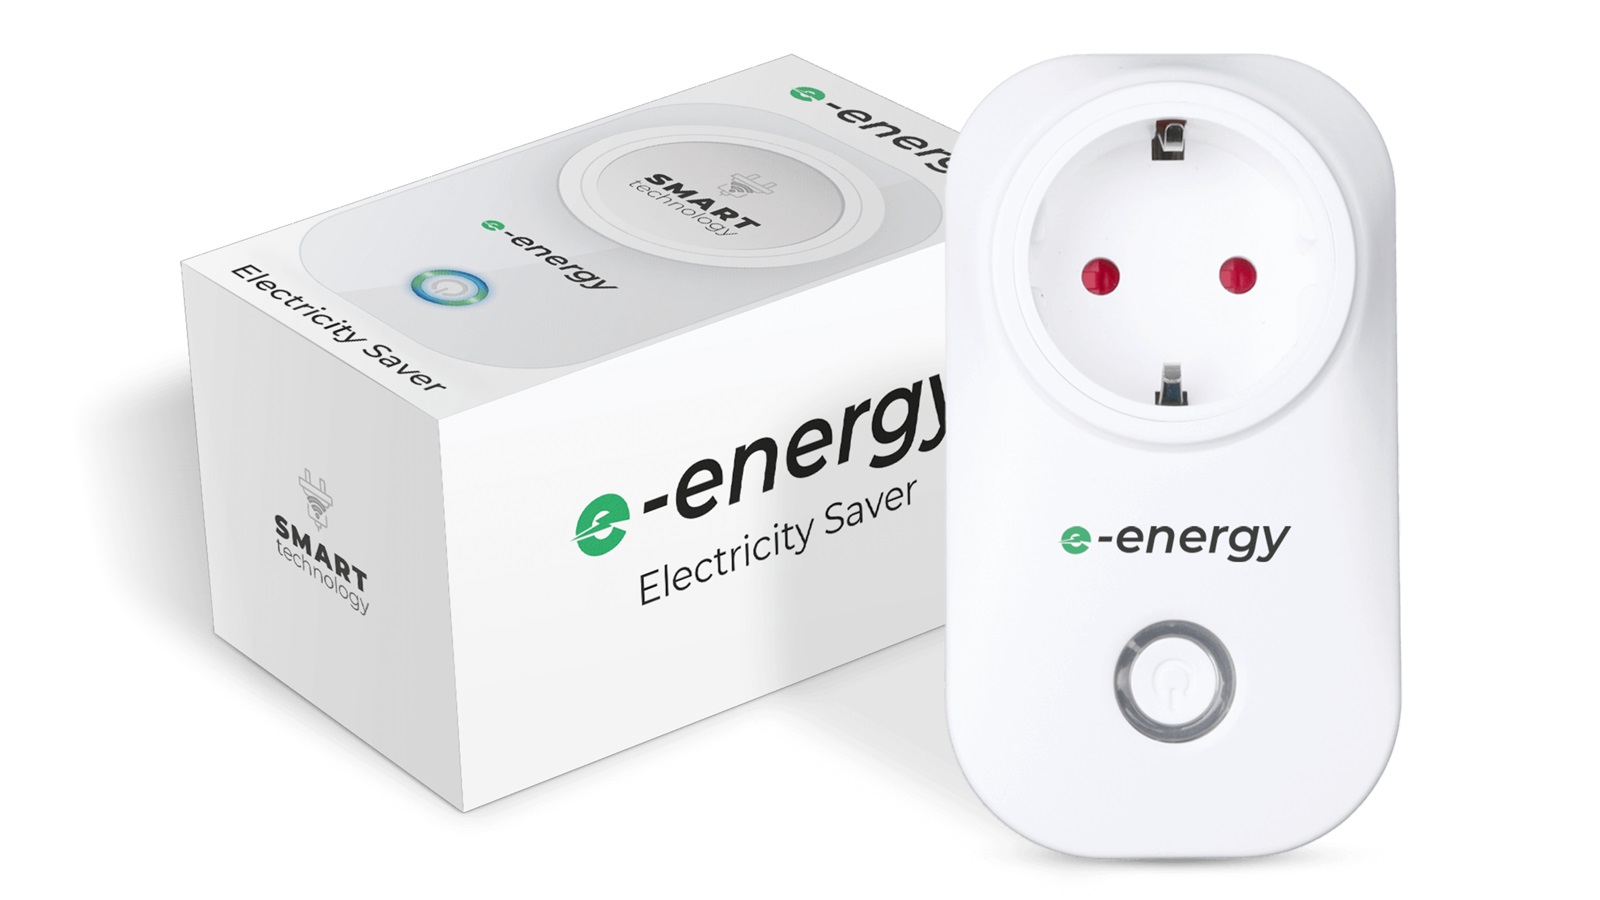 EcoEnergy Electricity Saver is a scam, and saves no money